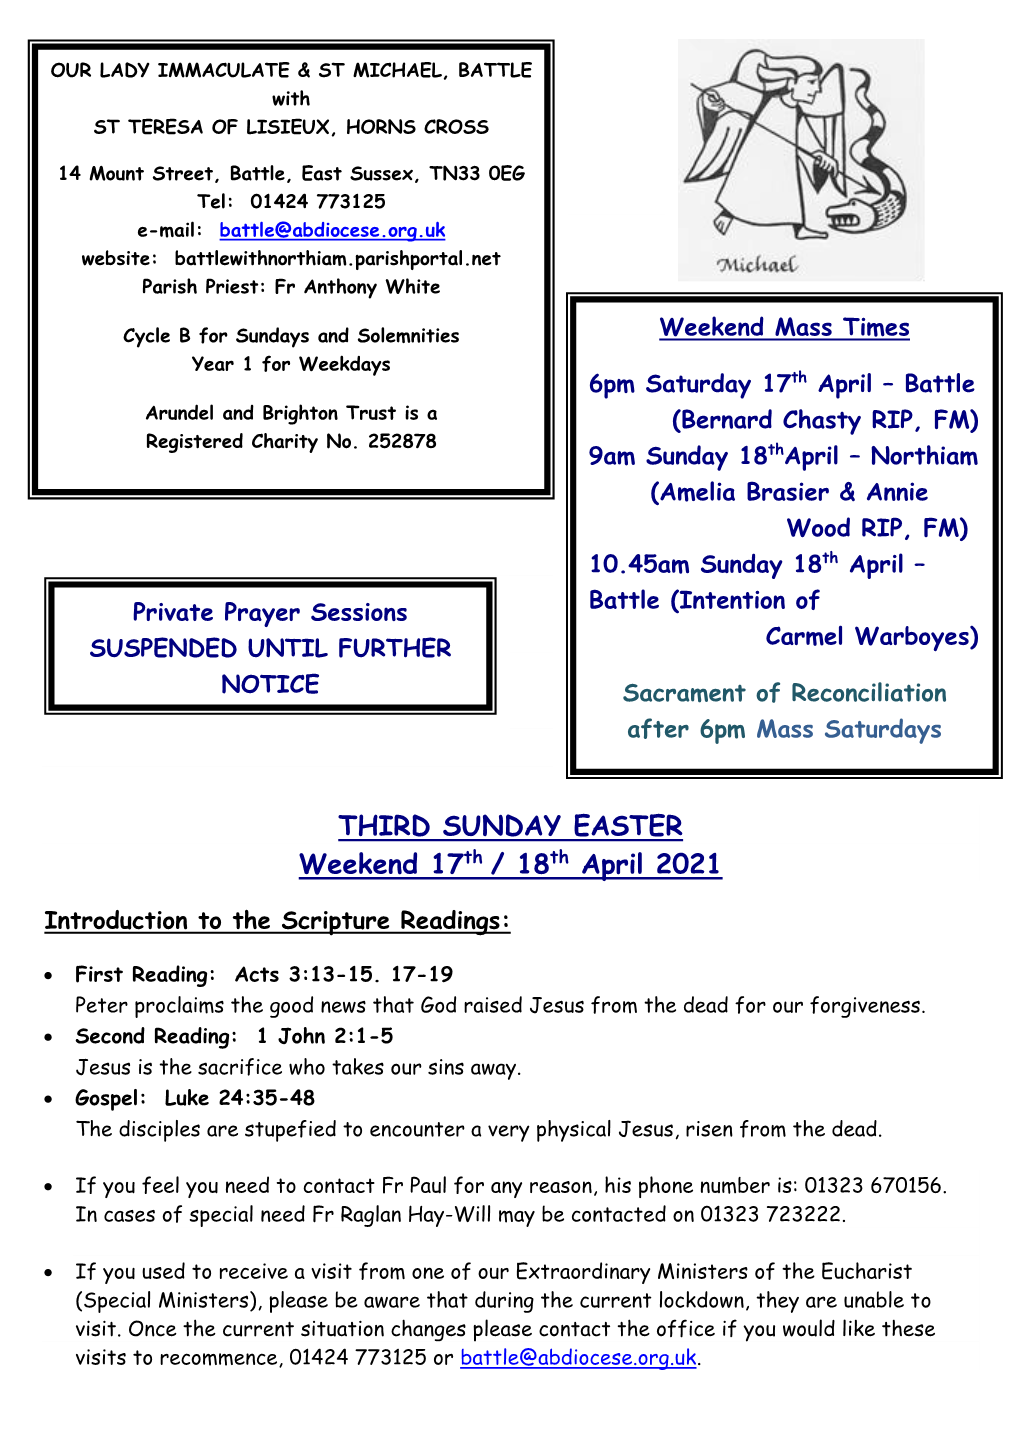 THIRD SUNDAY EASTER Weekend 17Th / 18Th April 2021